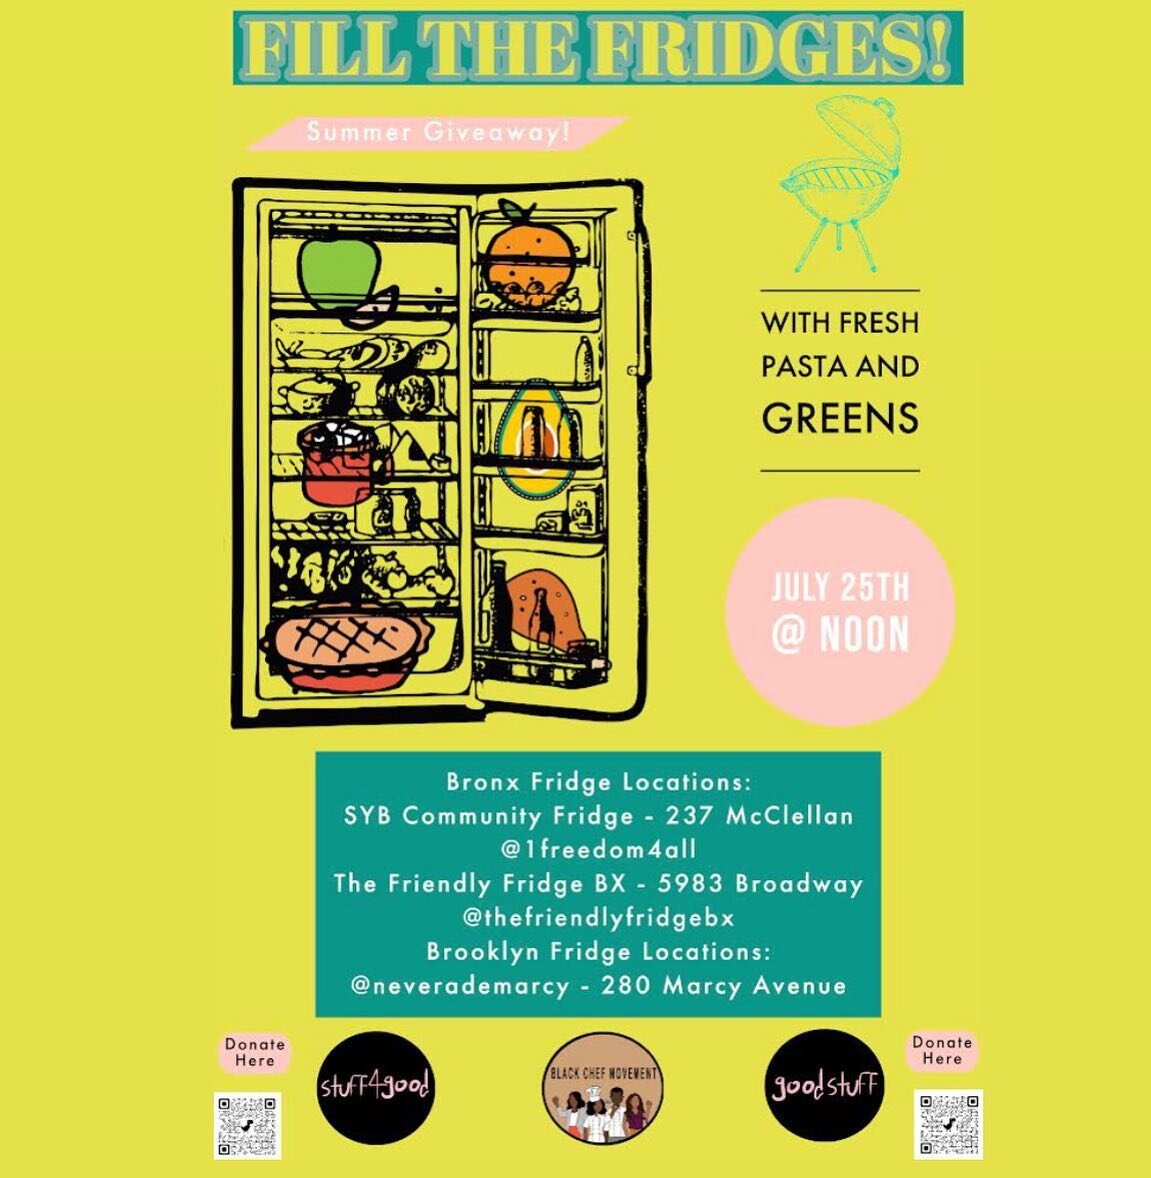 We are back at it again this month for our Fill The Fridges Initiative! ✨🙌🏾 We are feeding the communities that are in need with fresh handmade food. 

#freefood #communityfridge #blackchefmovement #foodforeveryone #joinus #givingback